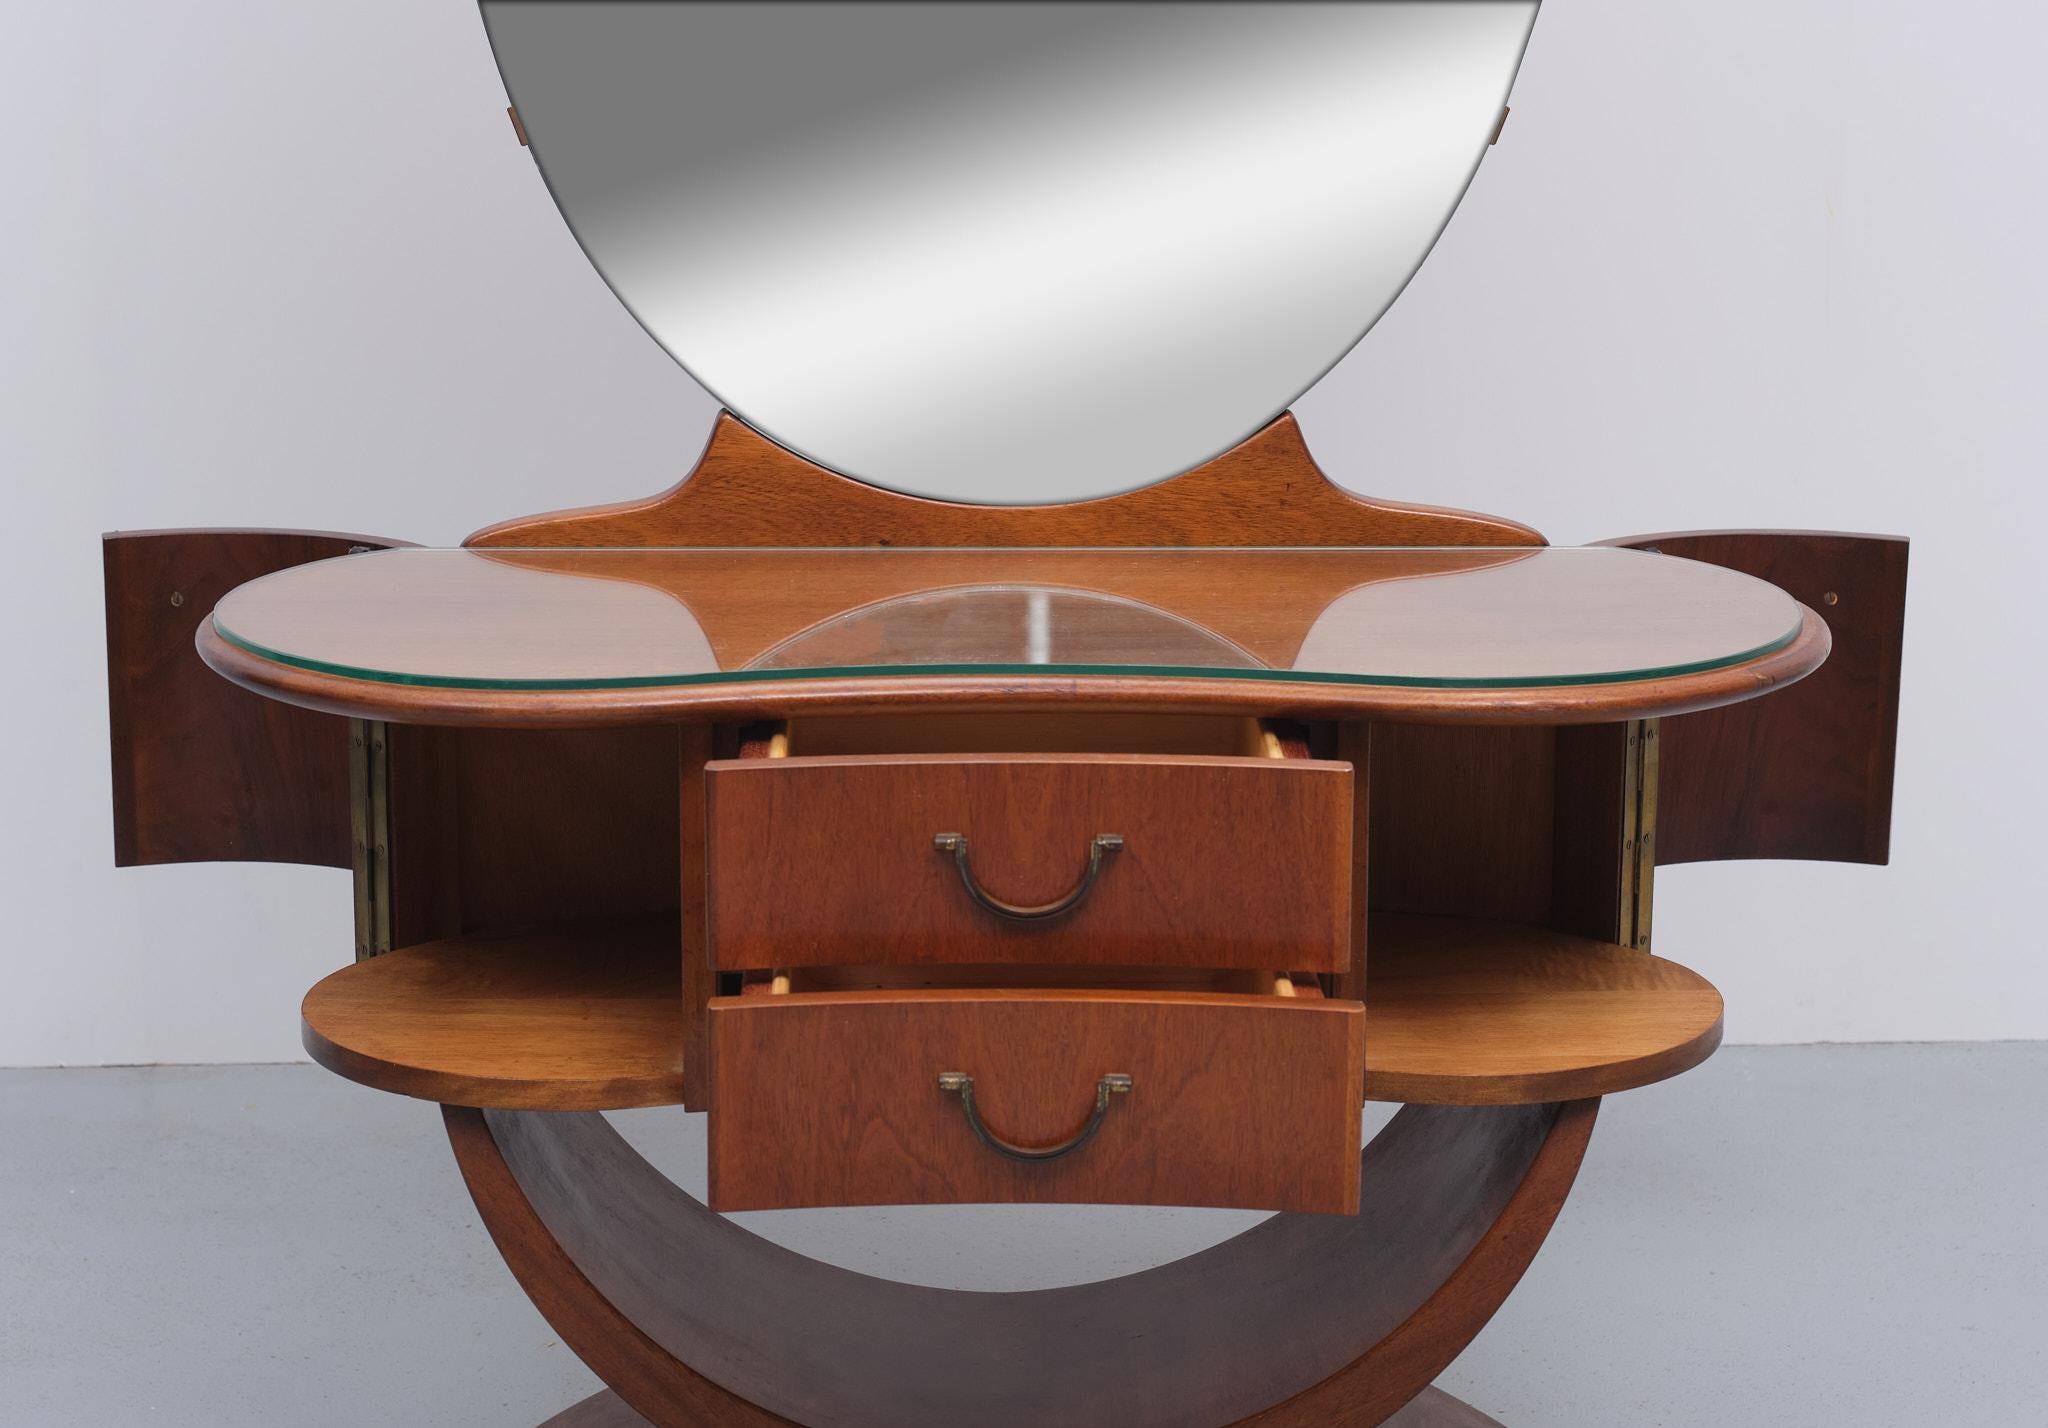 Nutwood A A Patijn Curved Vanity and stool  Zijlstra Joure Holland 